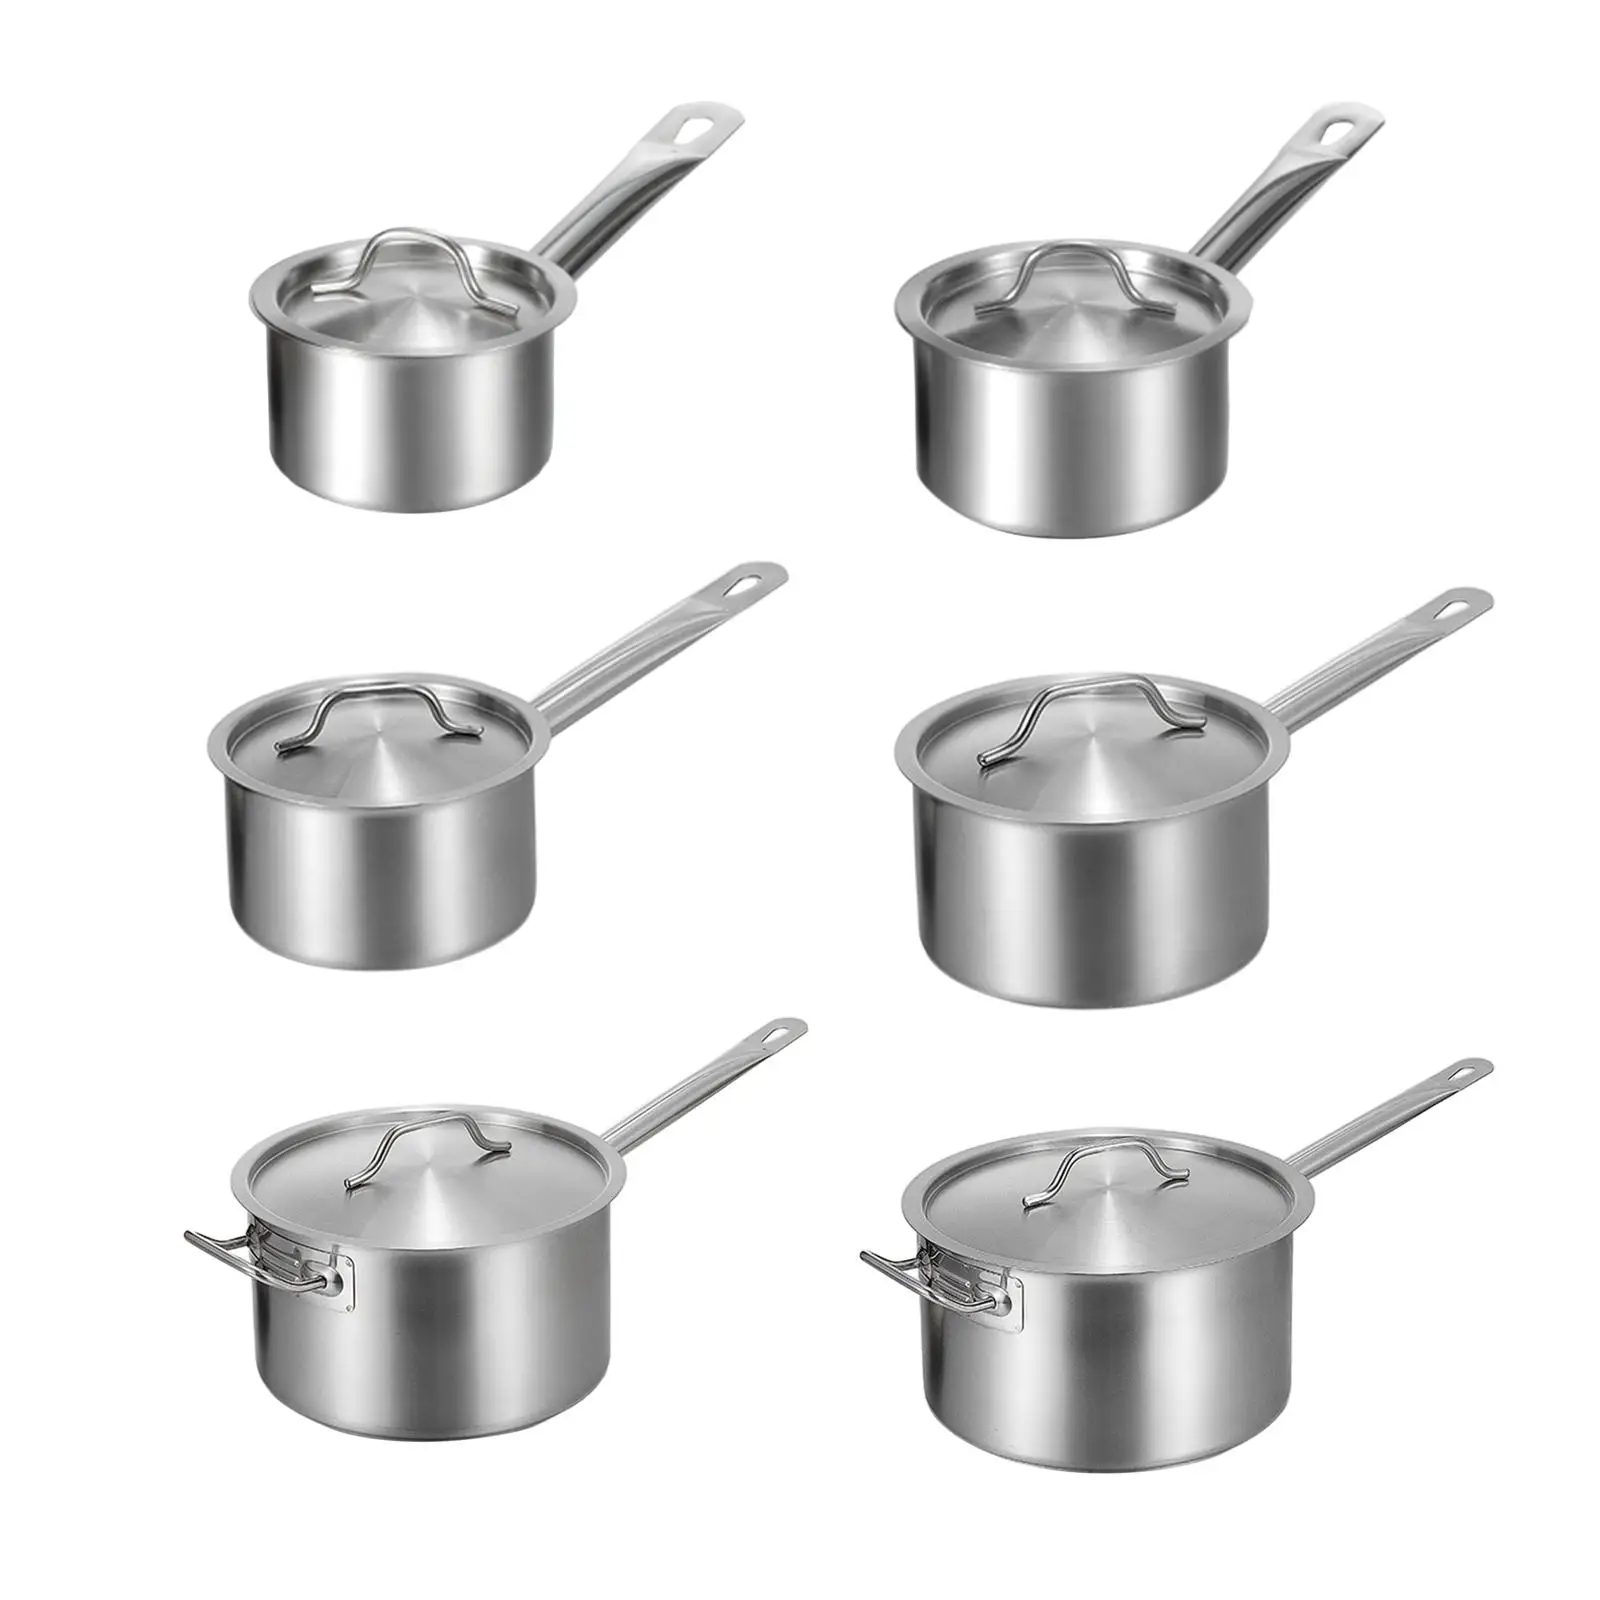 Saucepan with Lid Pasta Stainless Steel Cooking Pot for Teahouse Restaurants Kitchen